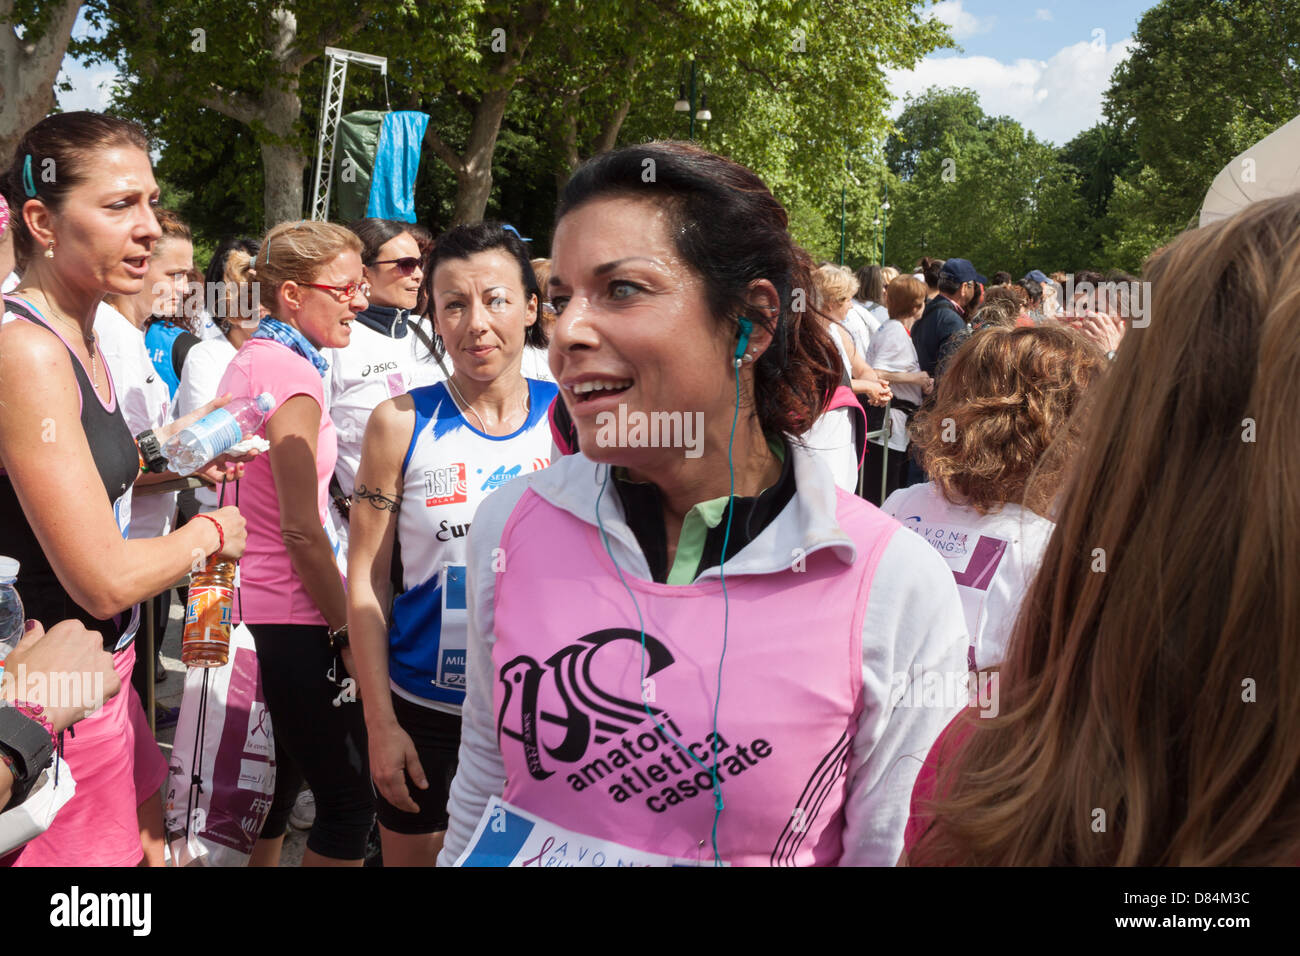 Milan, Italy - May 19, 2013: Thousands of women at the Avon running for promoting a healthy and active lifestyle Stock Photo